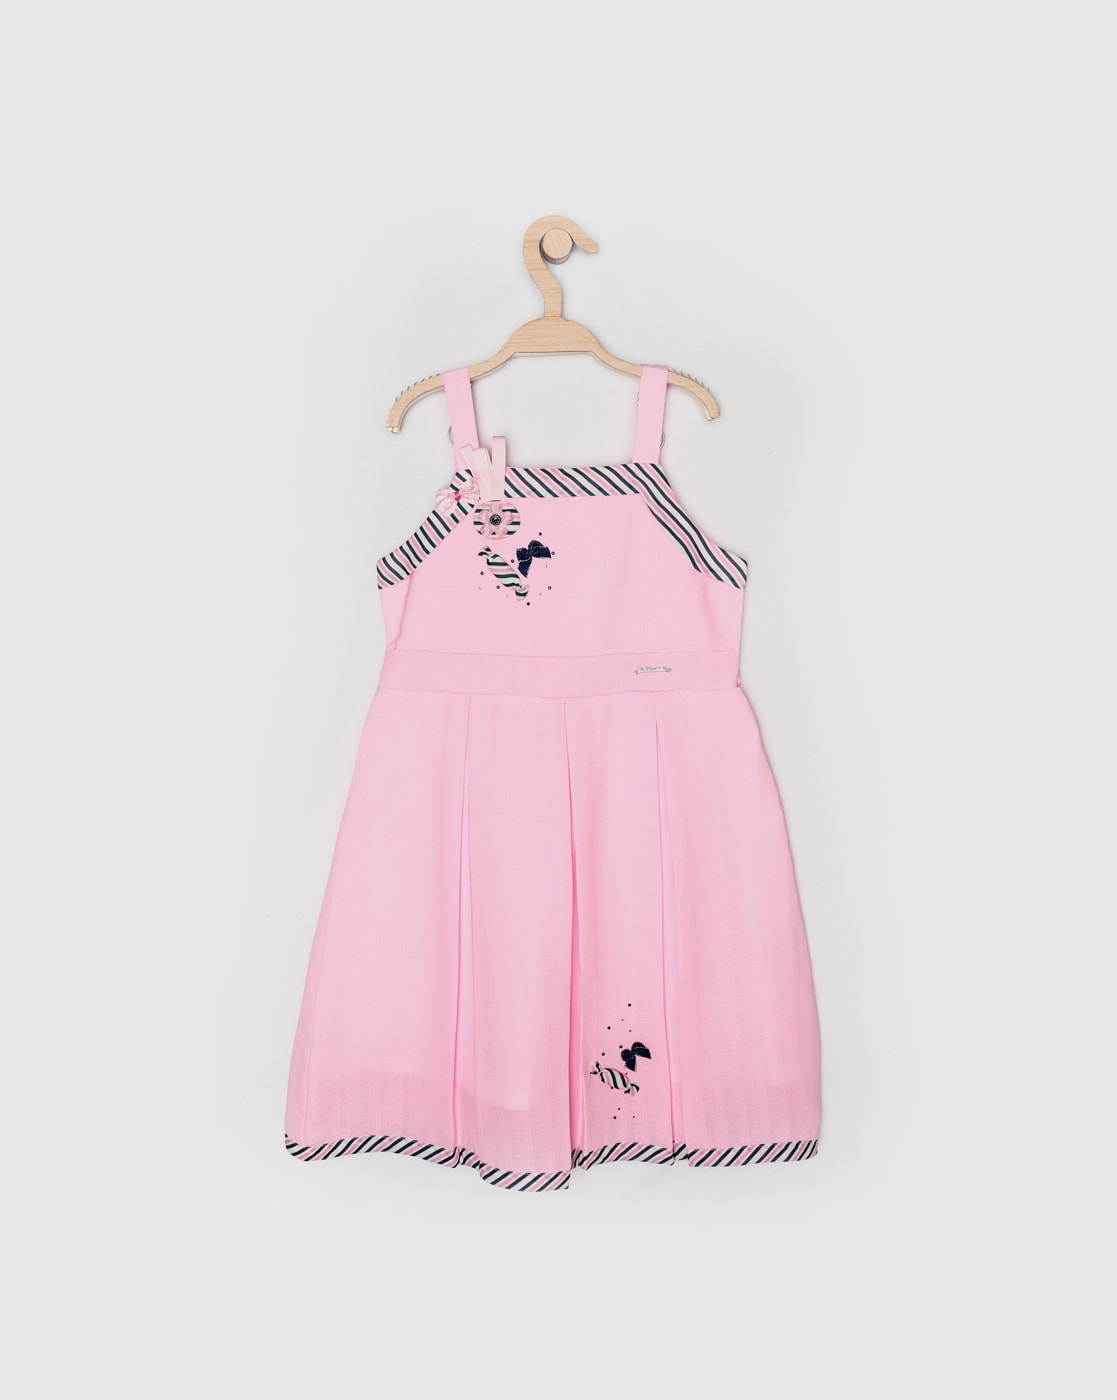 Pink Flower Girl Dresses with Sleeves by Hannahrosevintageboutique.com